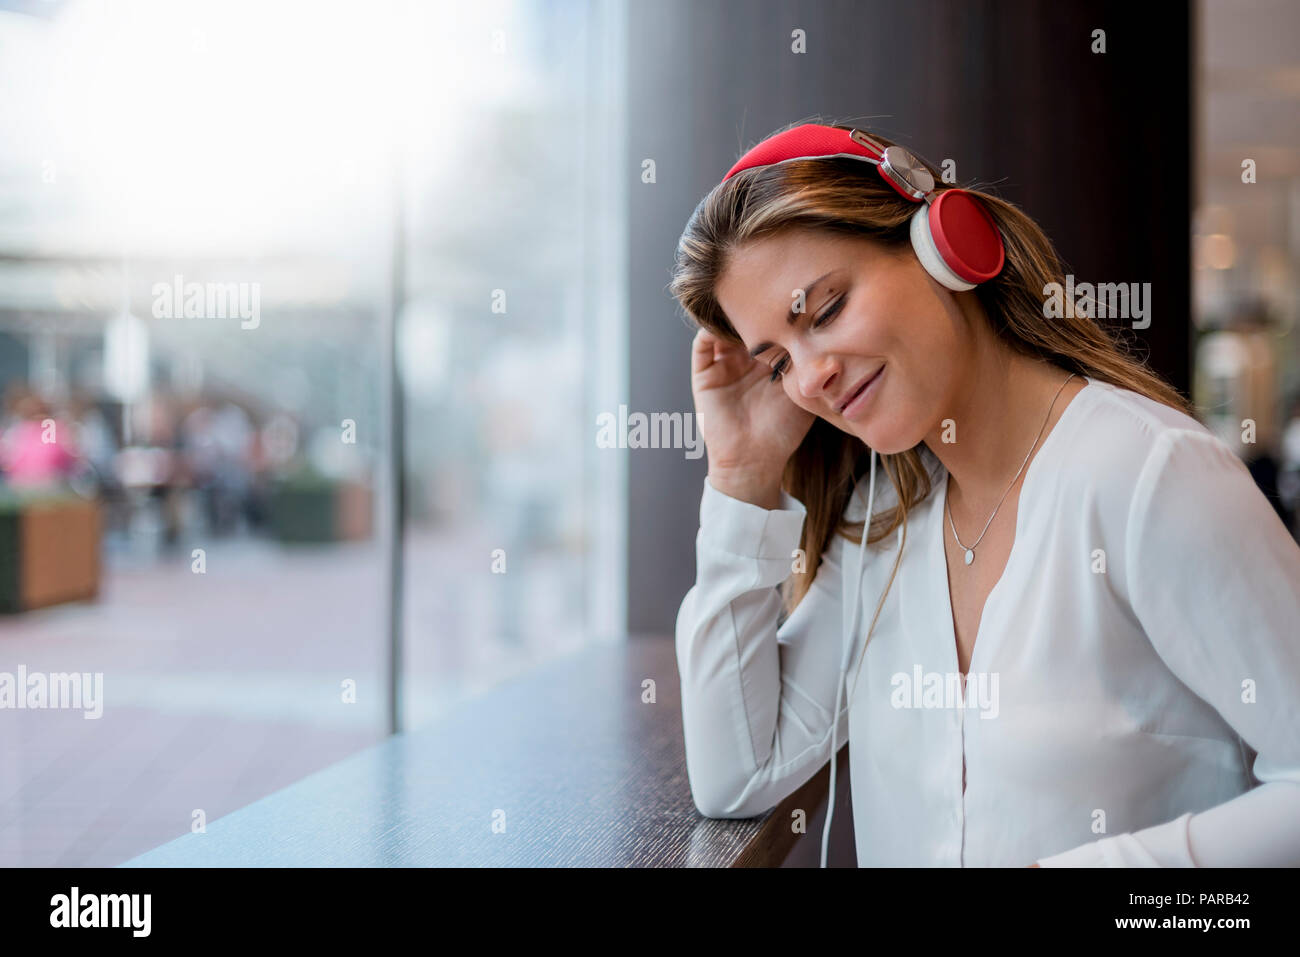 Smiling young woman listening to music with headphones Stock Photo